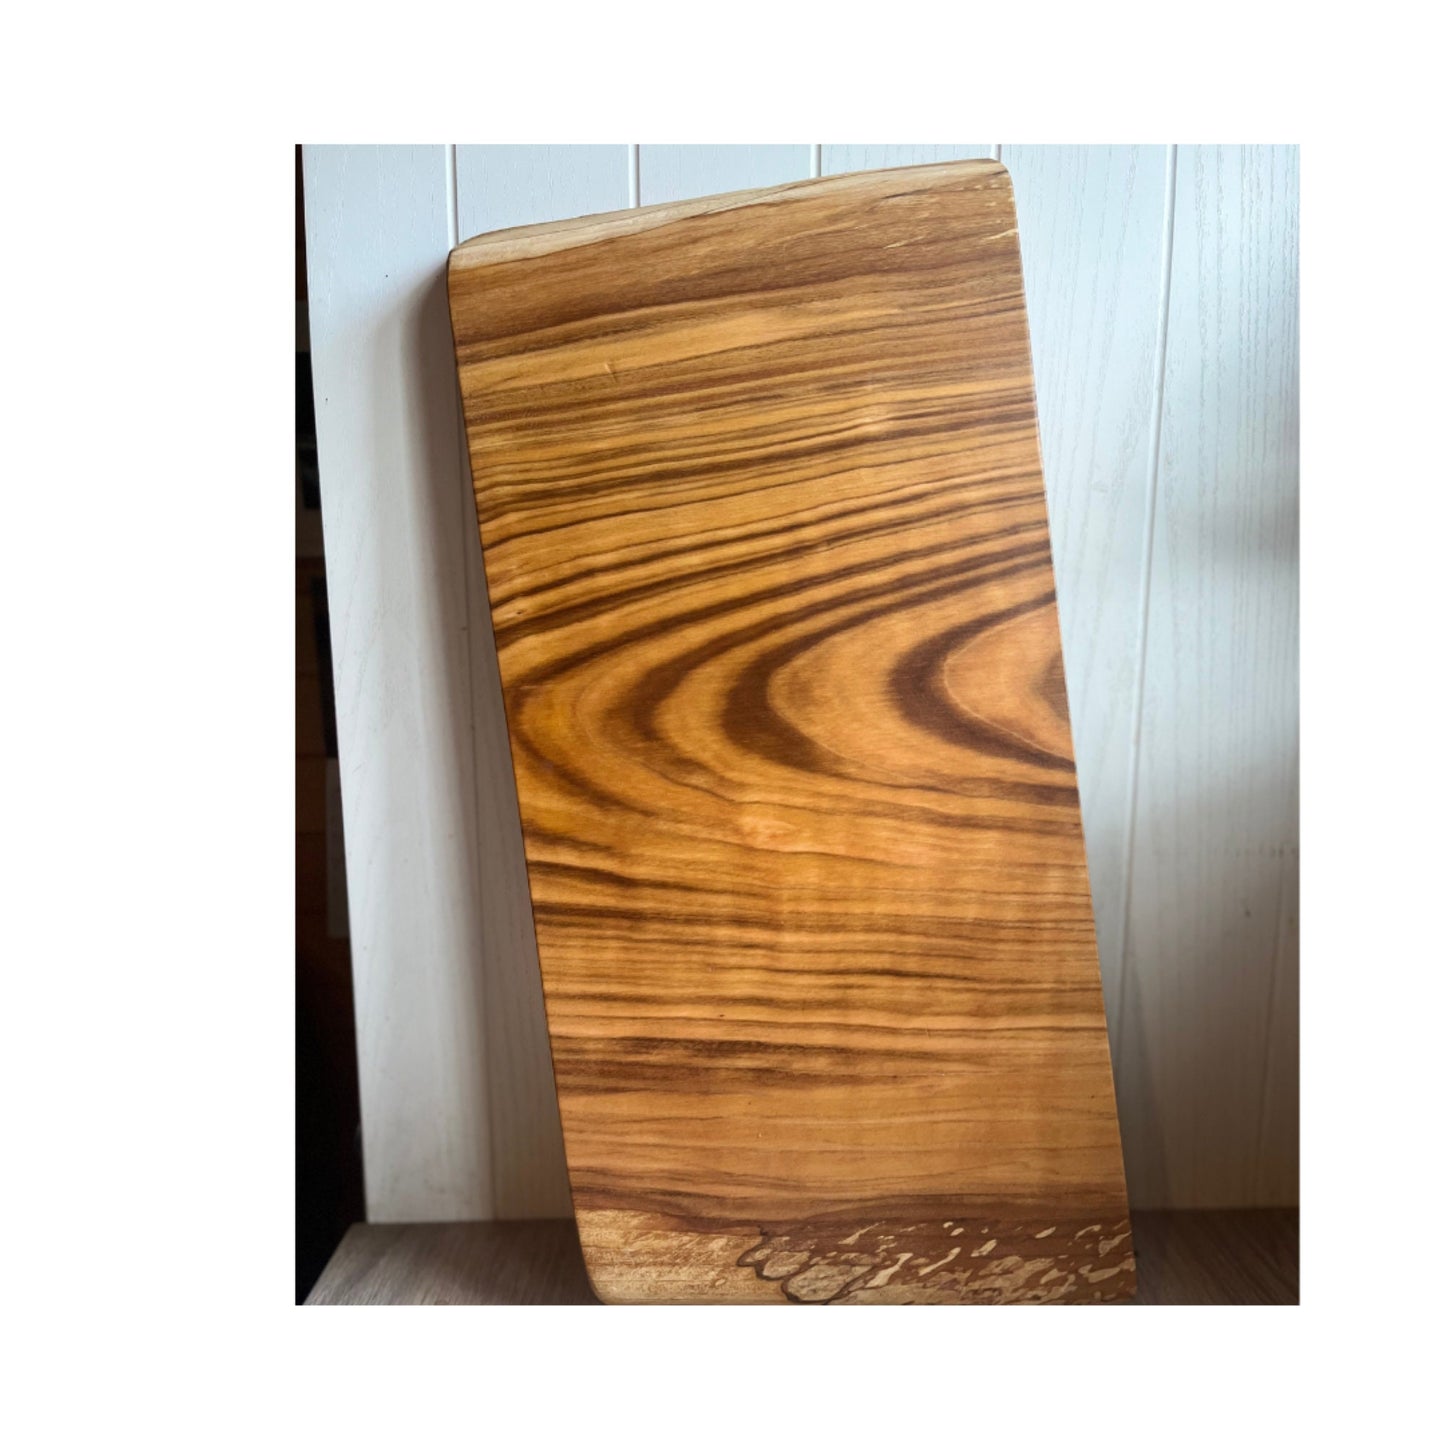 Live Edge Chopping Board, Solid Cherry Serving Board, charcuterie board/platter James Martin style